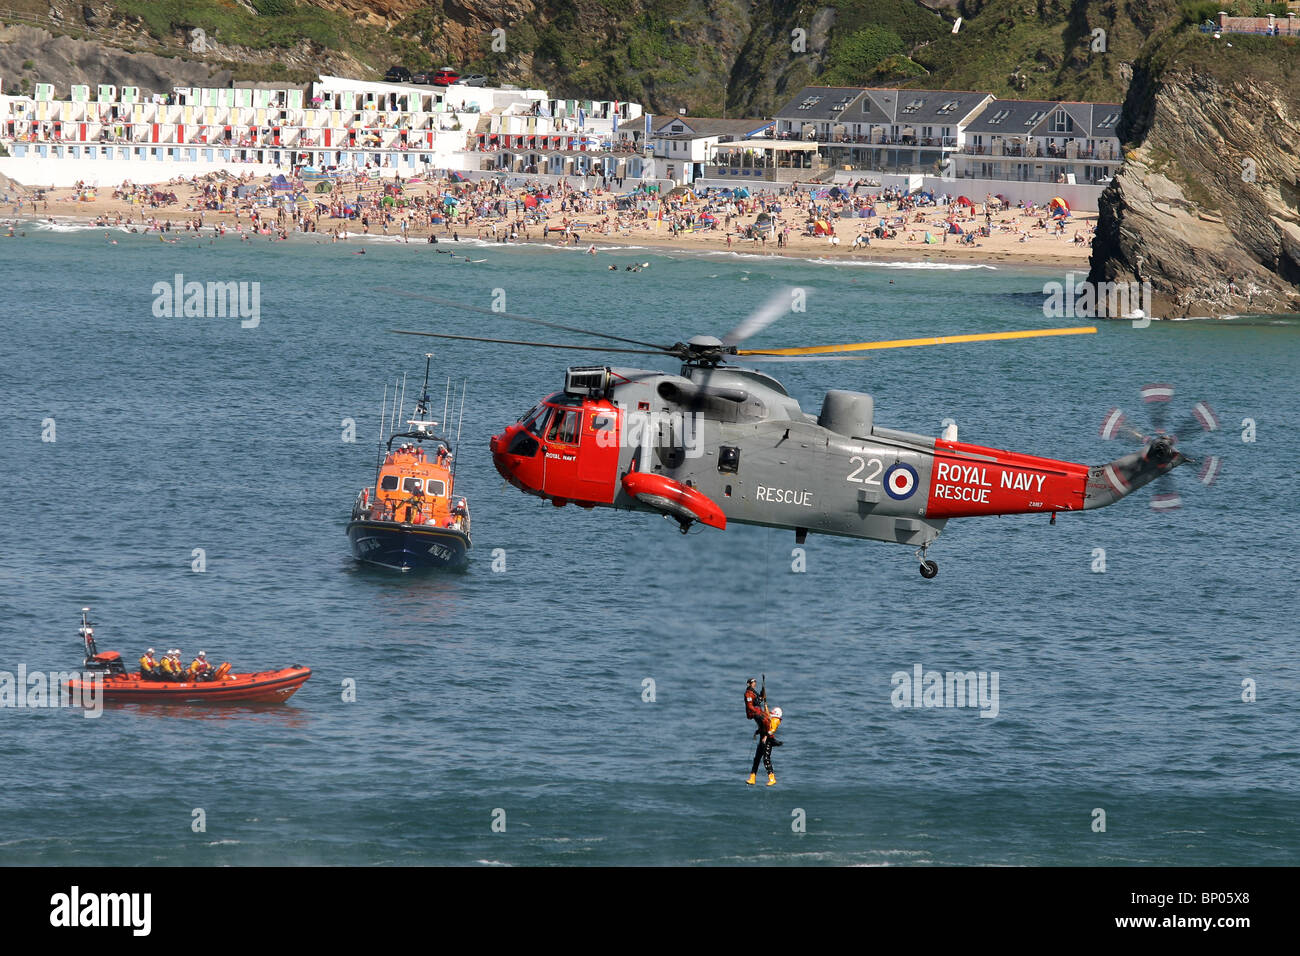 The RNLI air sea rescue display in Newquay Harbour, August 8th, 2010. Stock Photo